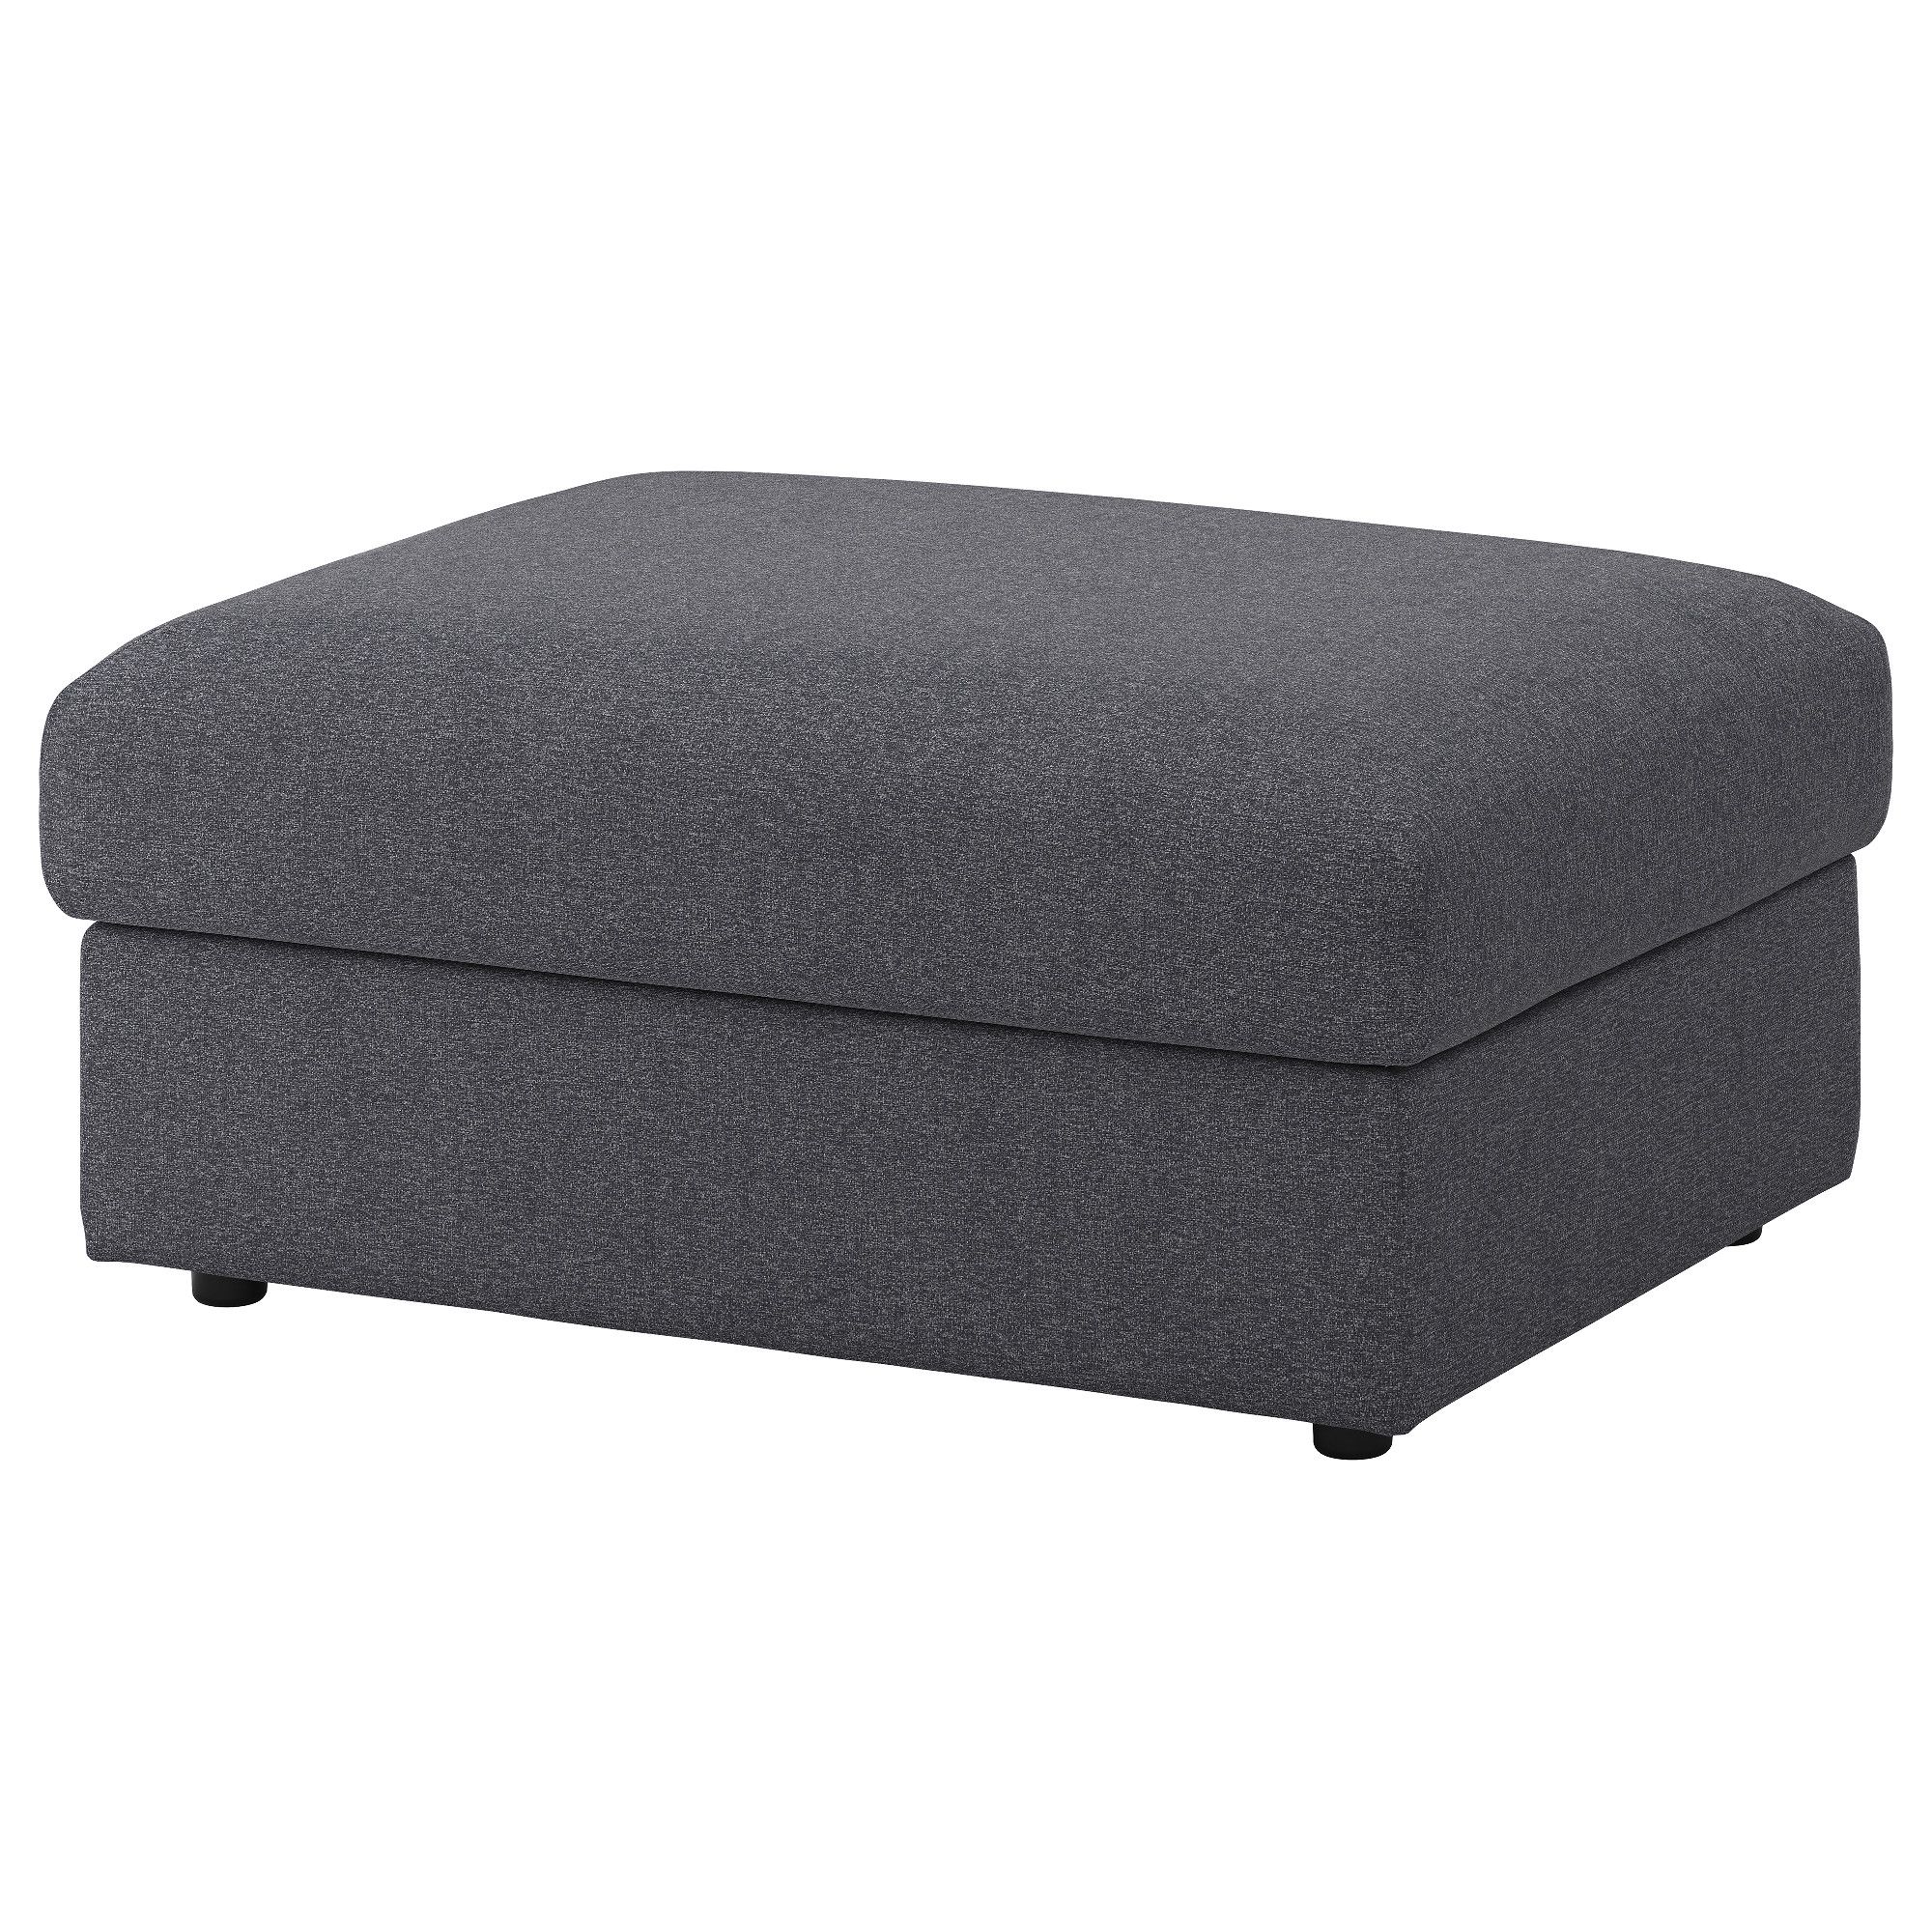 Vimle Footstool With Storage Gunnared Medium Grey Ikea Intended For Footstools And Pouffes With Storage (View 2 of 15)